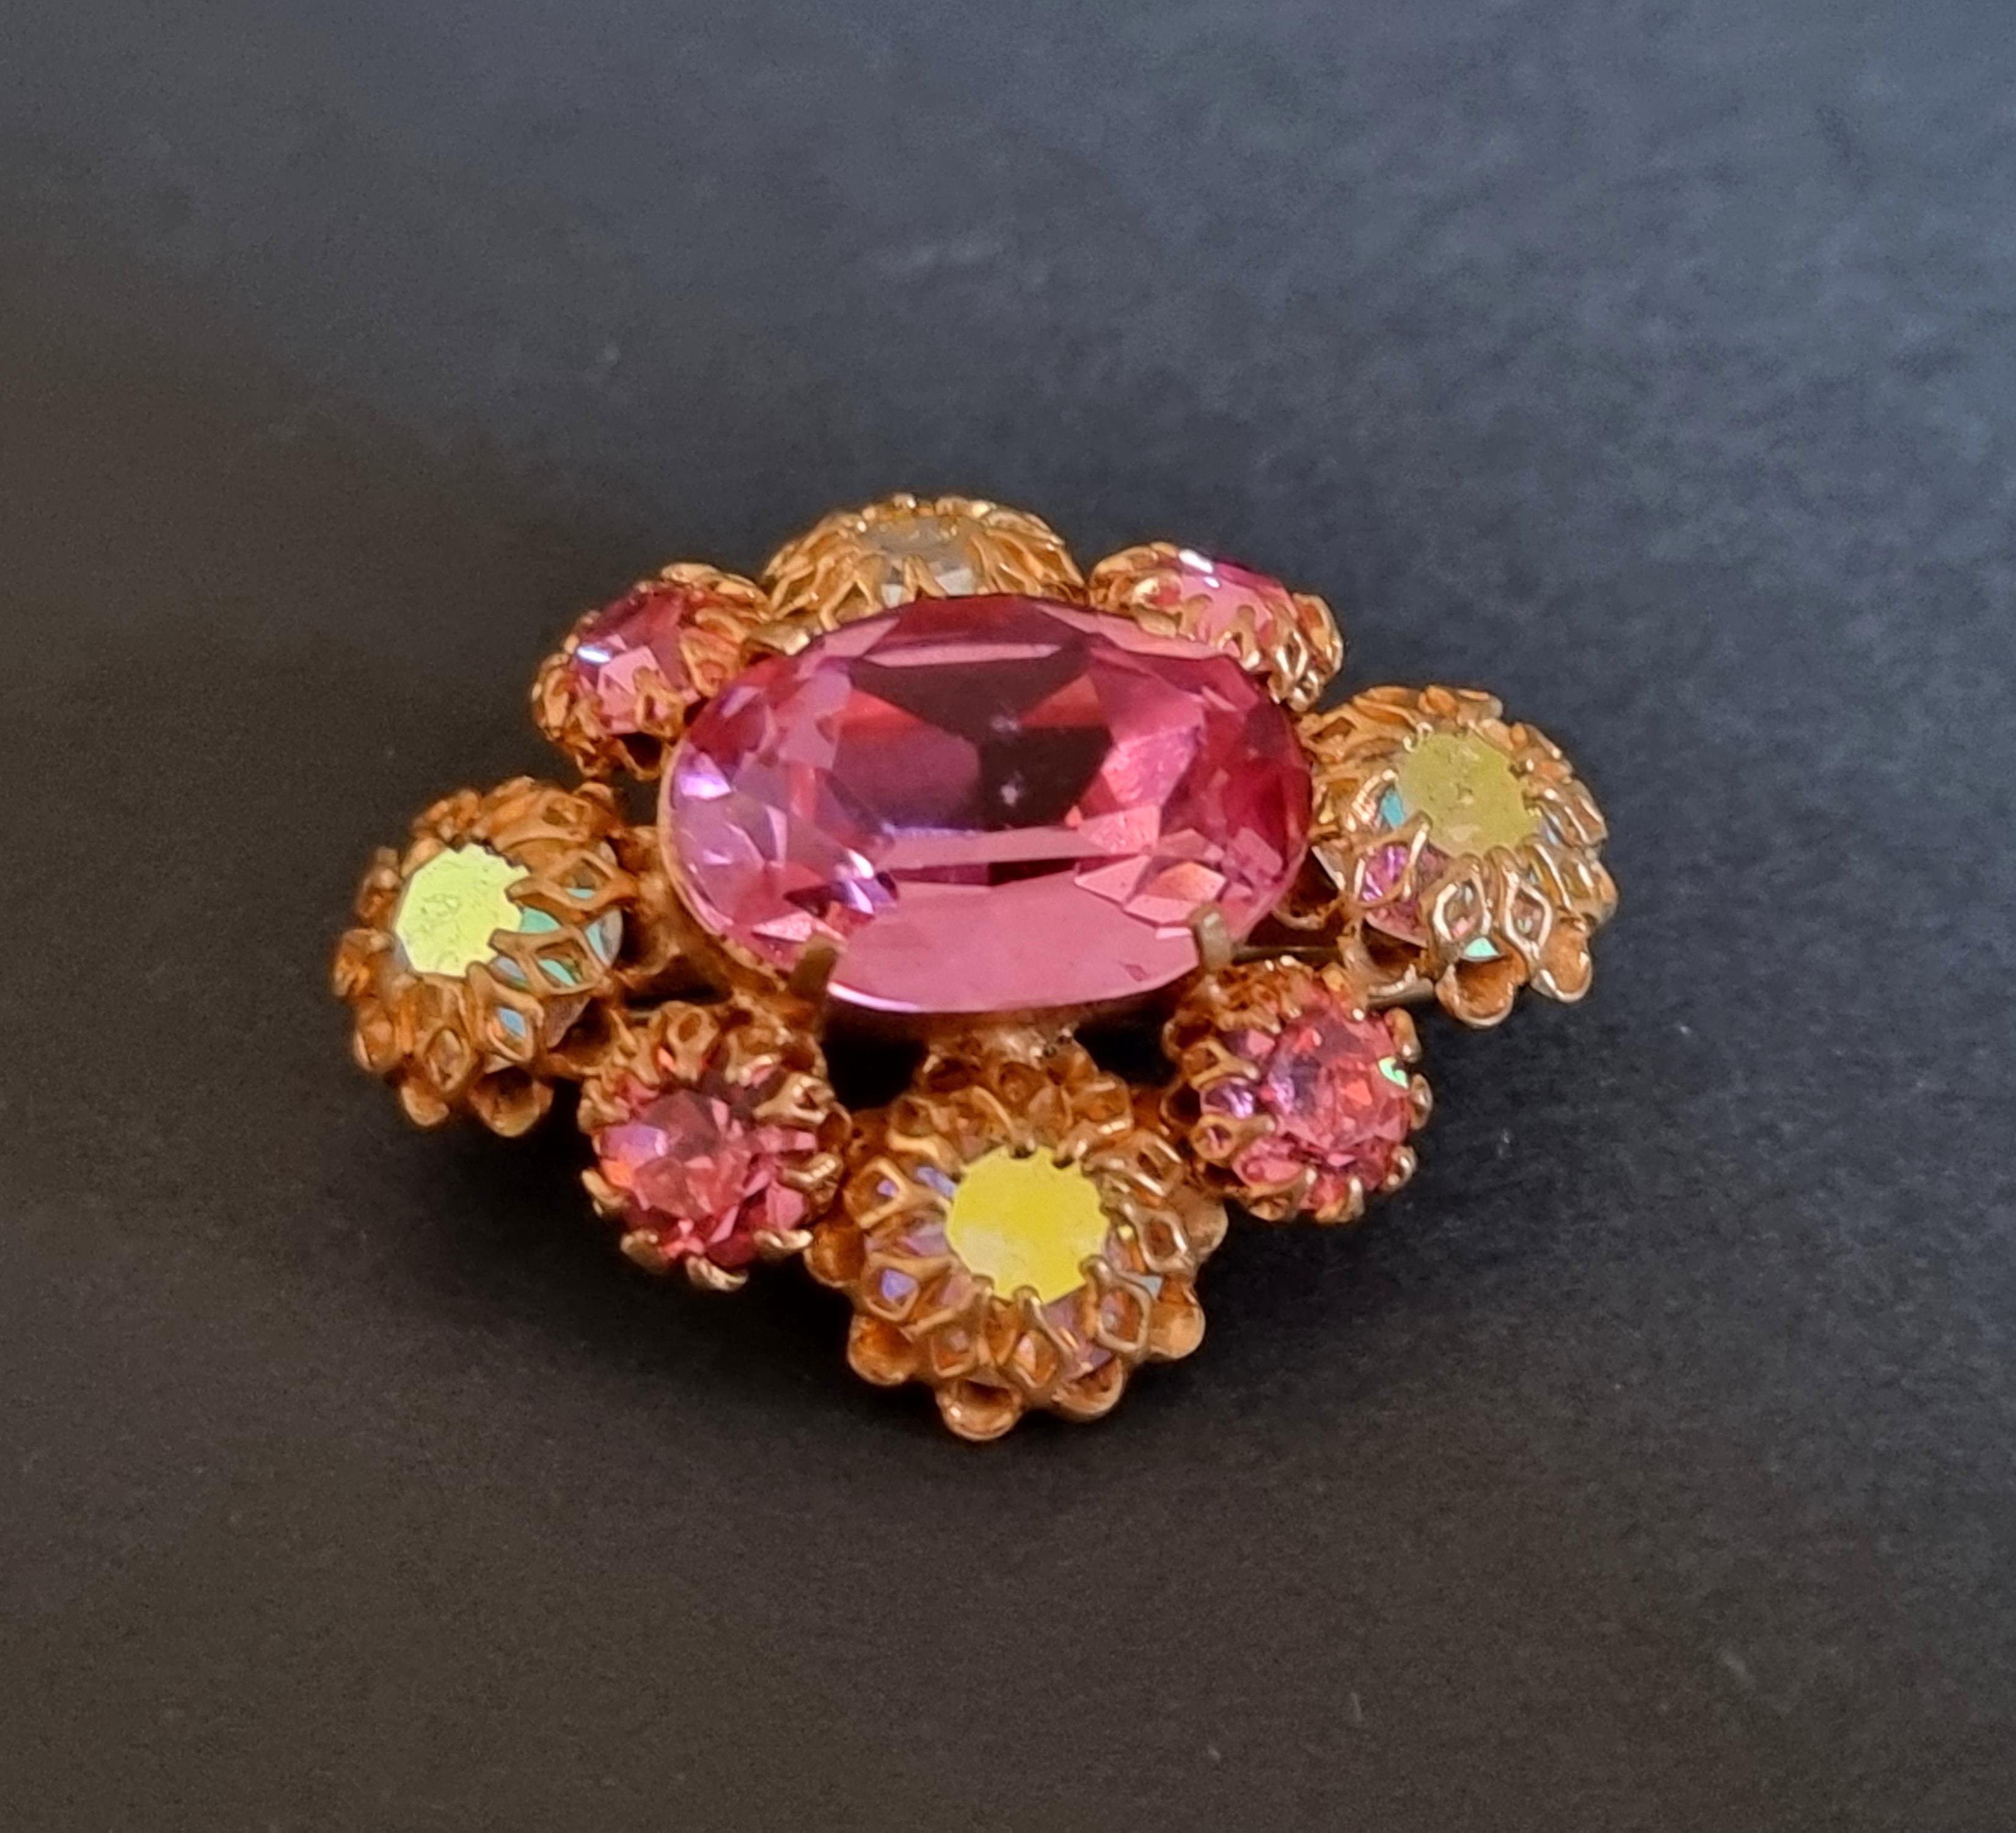 Magnificent old brooch,
50s vintage,
High Fashion designer CIS countess Cissy ZOLTOWSKA,
length 3,8cm, width 3cm,
very good state.

Countess Cissy Zoltowska - a name synonymous with elegance and refinement - was an exceptional artist who became